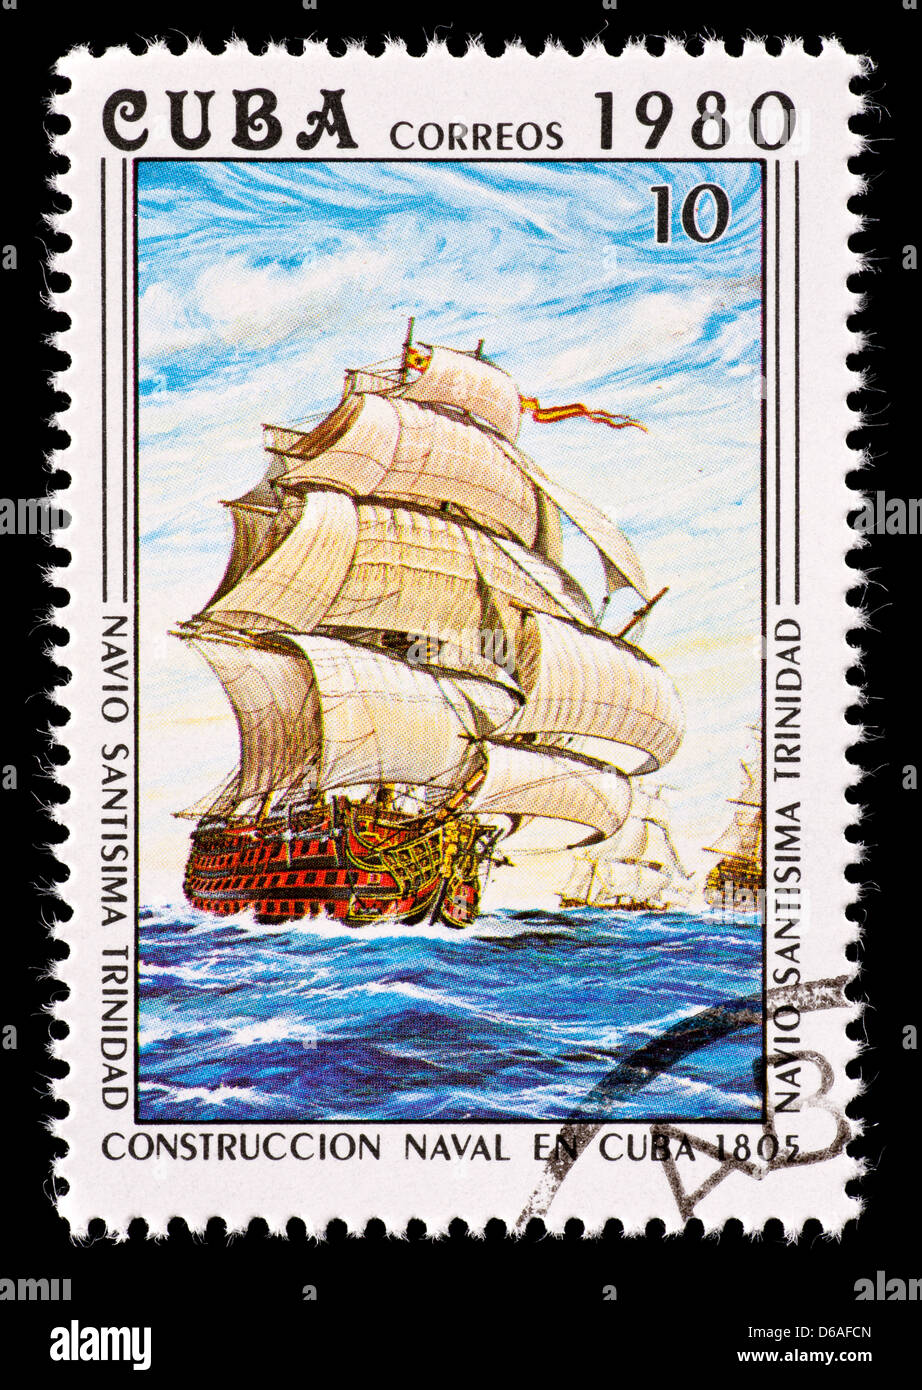 Postage stamp from Cuba depicting the naval warship Santisima Trinidad at sea. Stock Photo